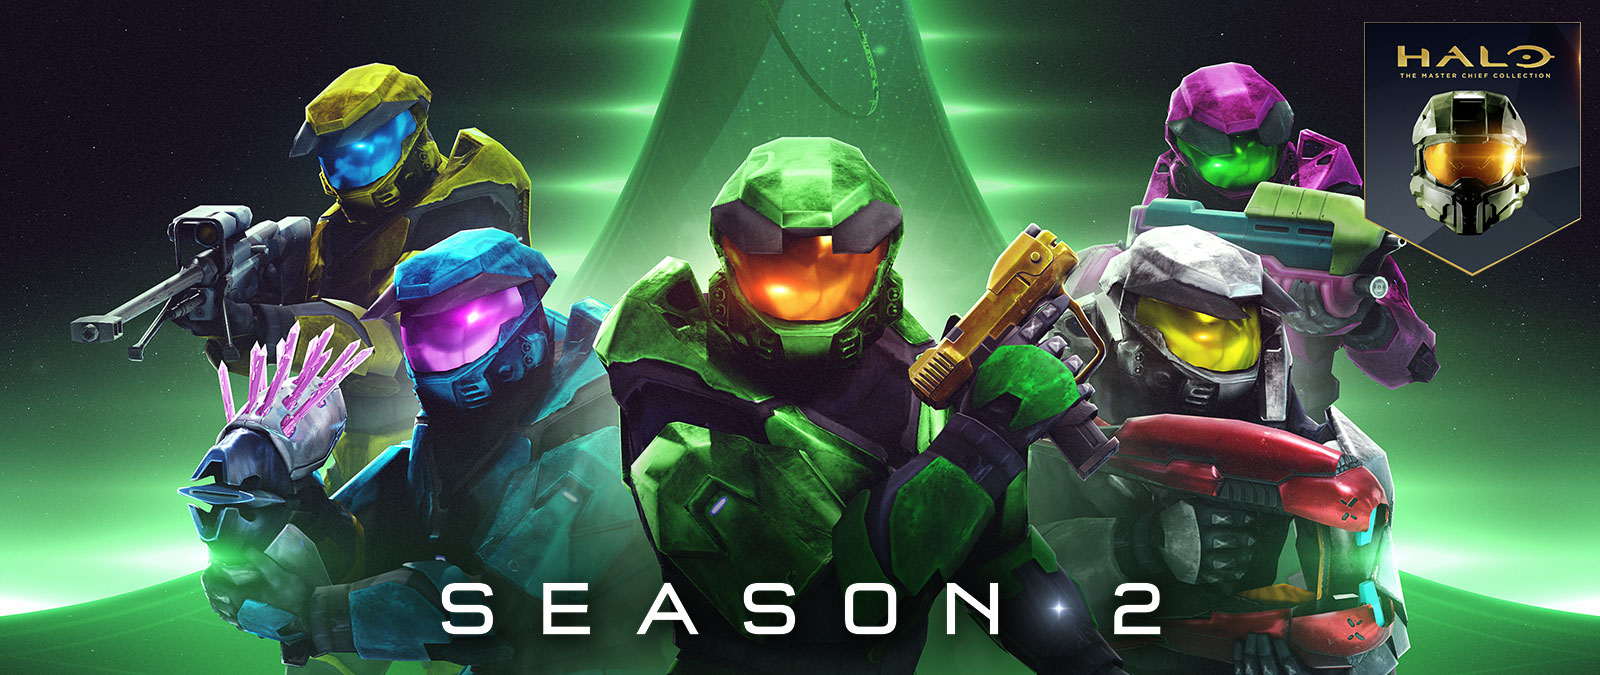 Halo: The Master Chief Collection, Season 2, 5 Spartans from Halo Combat Evolved hold colorful weapons like the needler and pistol